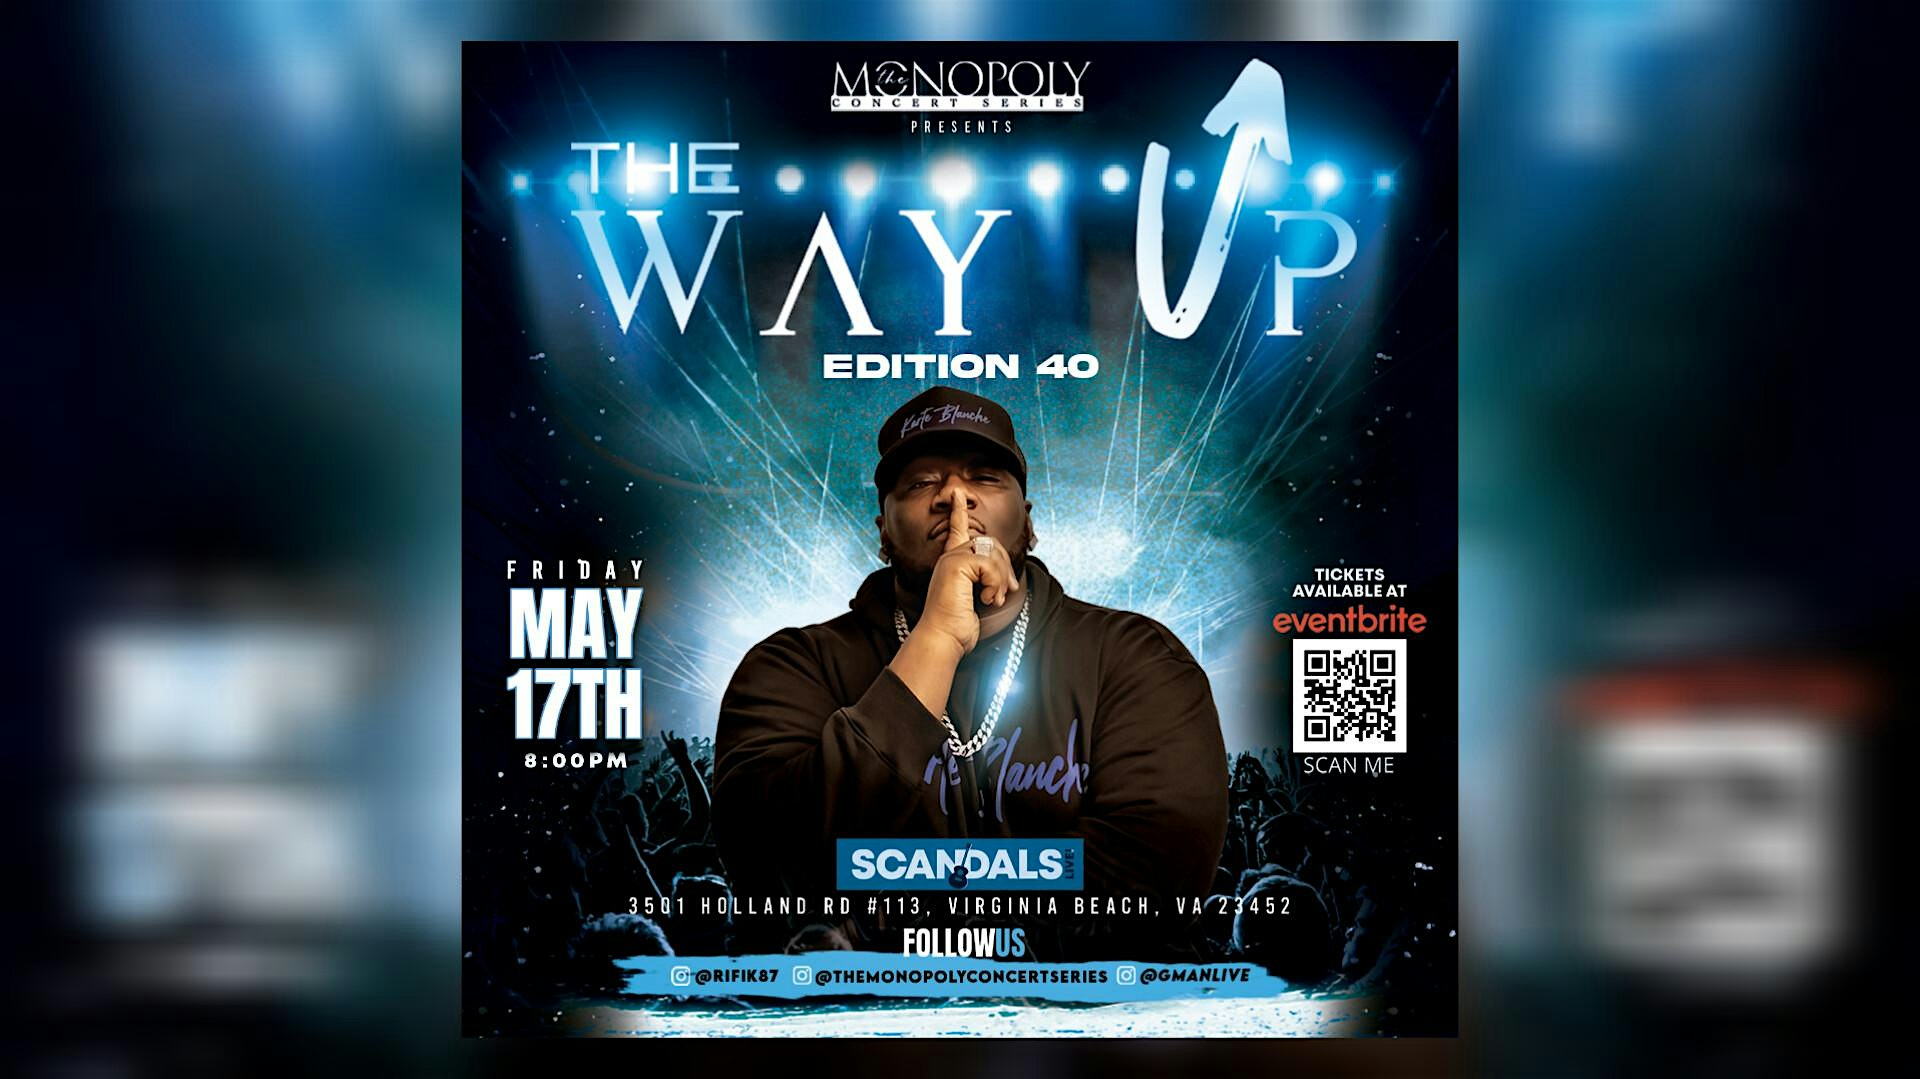 The Monopoly Concert Series presents The Way Up Edition 40